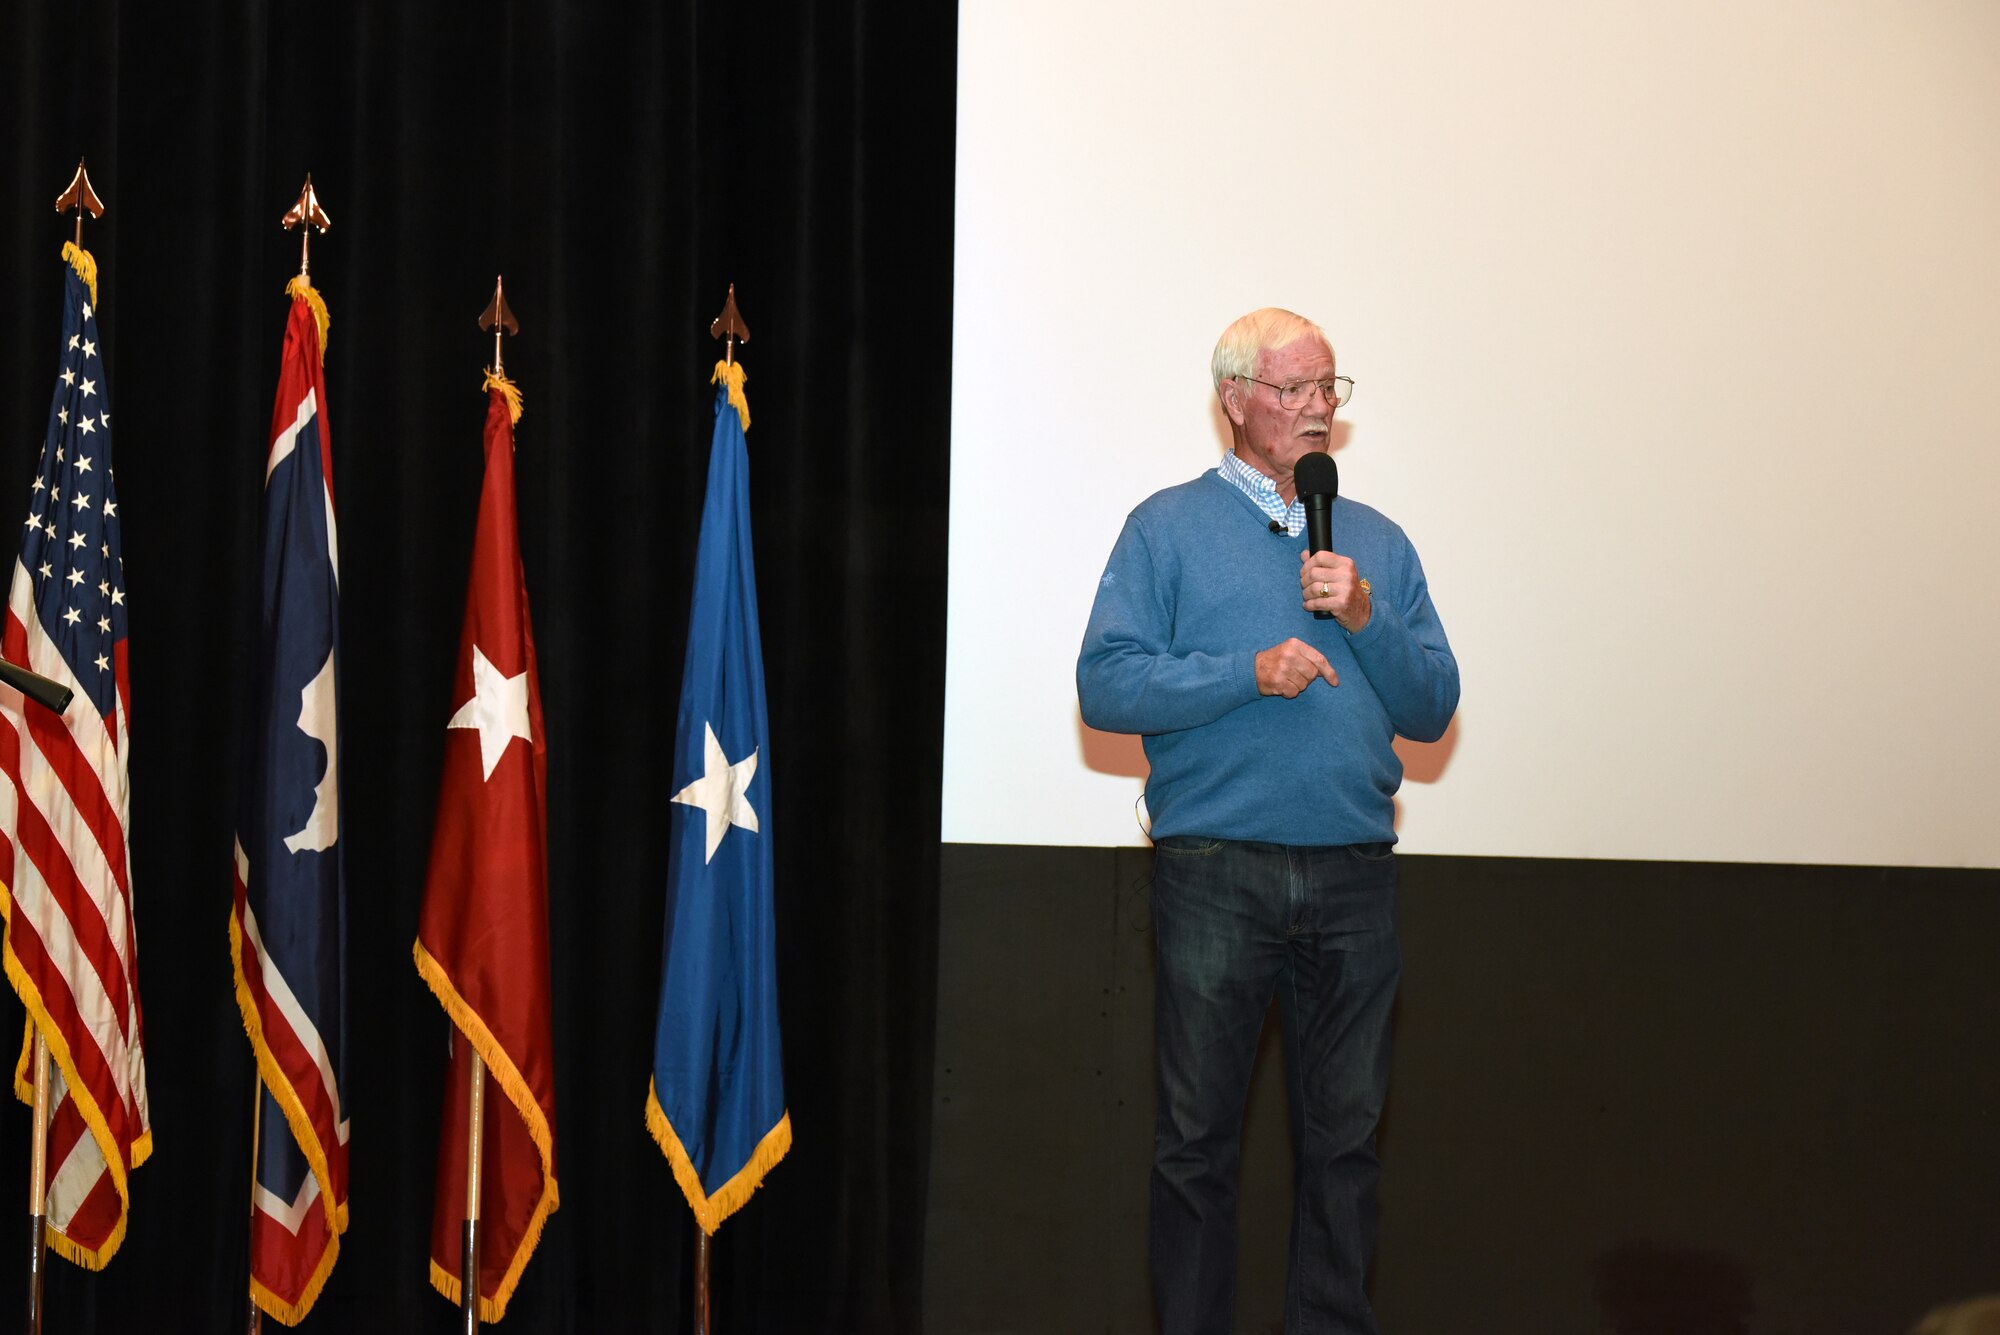 Retired U. S. Air Force Col. Ed Hubbard speaks to 153rd Airlift Wing members, Dec. 5, 2015 at F.E. Warren AFB in Cheyenne, Wyoming. Hubbard detailed his experiences as a POW and provided insight on keeping a positive attitude during captivity. (U.S. Air National Guard photo by Tech. Sgt. John Galvin/released)